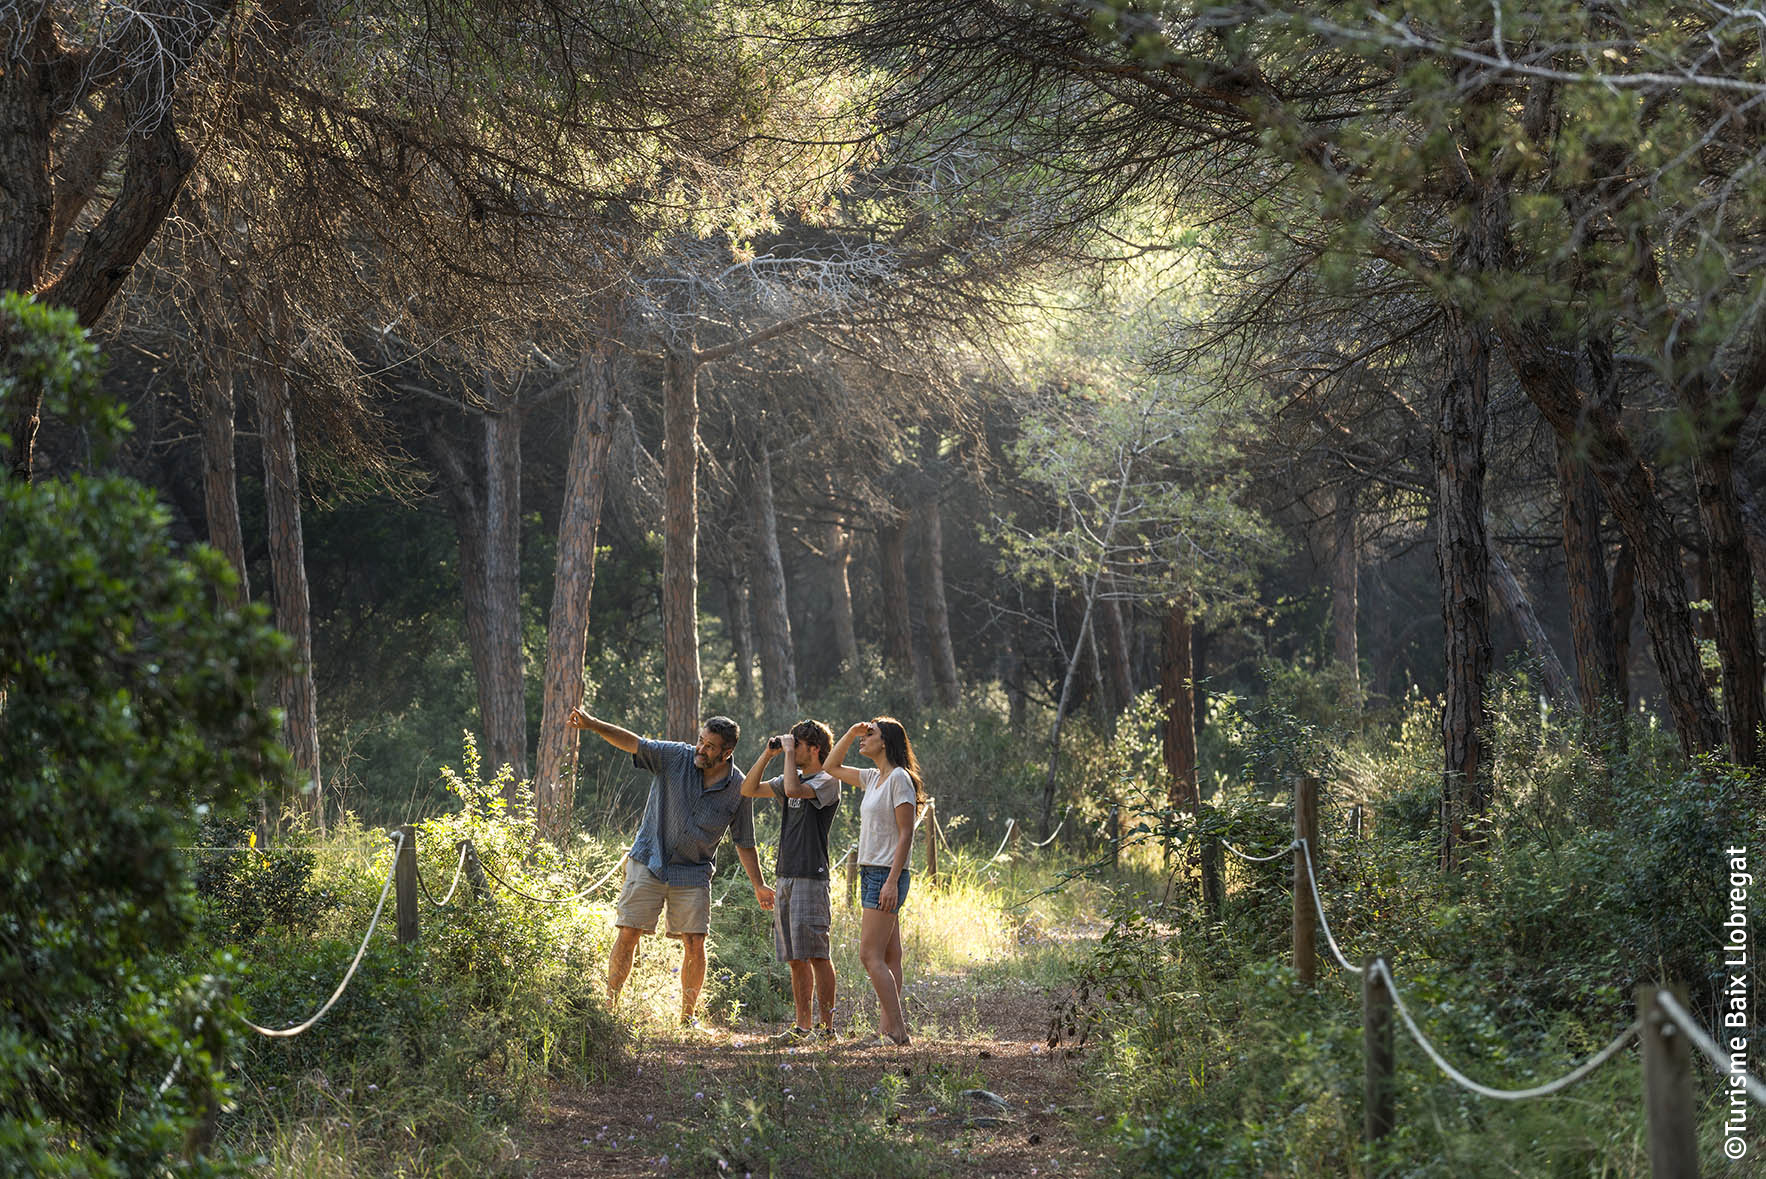 The Can Camins pine forest, one of the best preserved forest areas along the Catalan coastline.